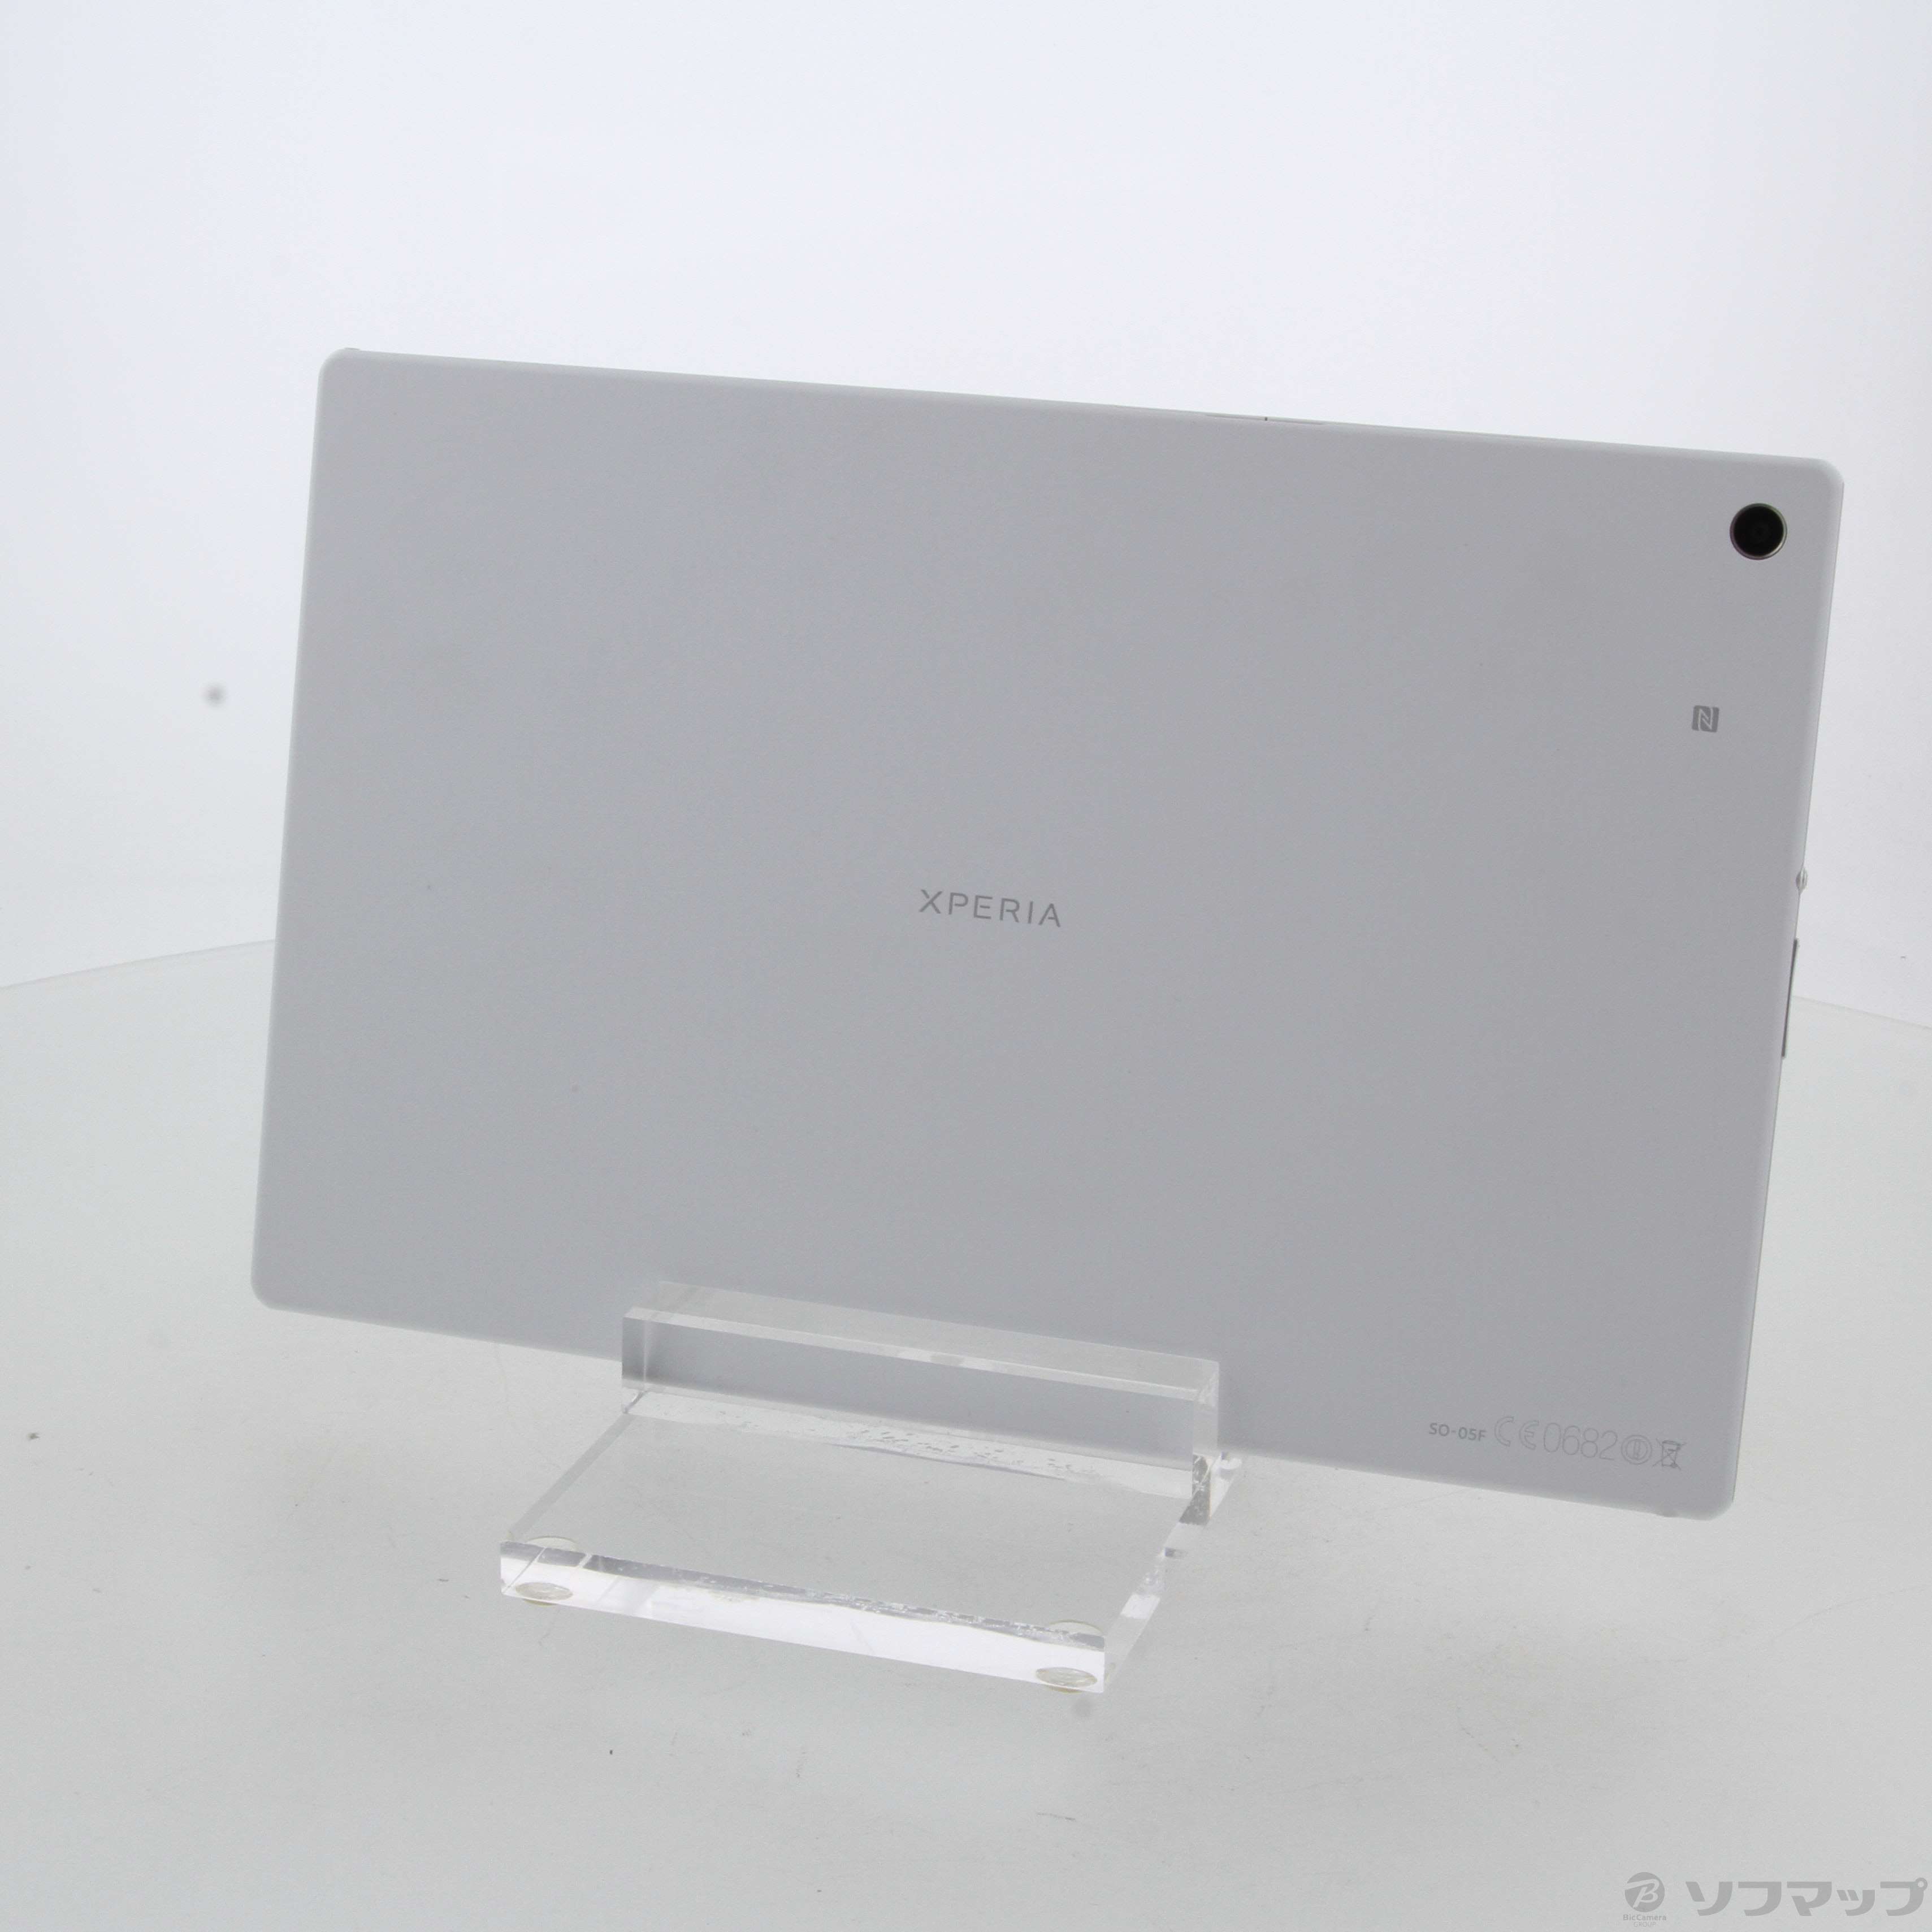 Sony Xperia Z2 Tablet 32G 3G【白】ジャンク